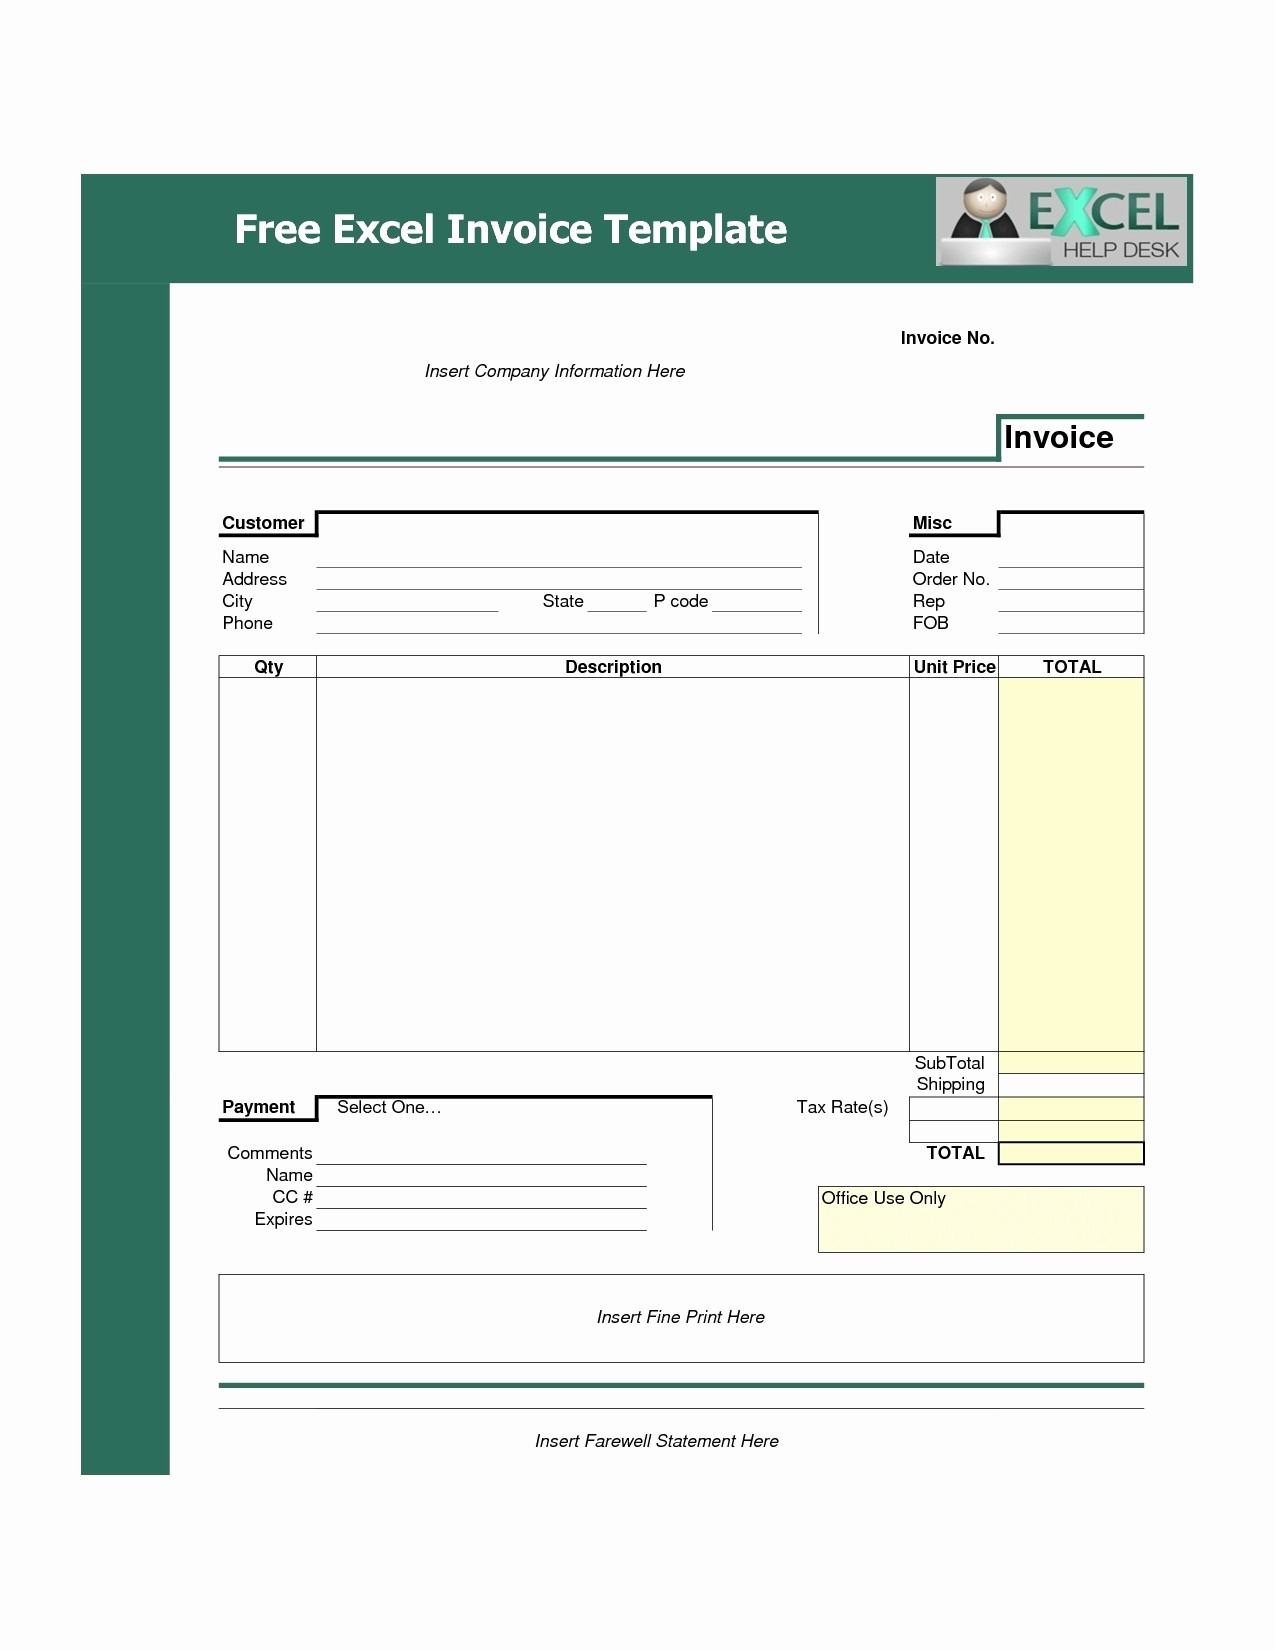 Free Invoice Template for Excel Elegant Invoice Template Free Download Excel Invoice Template Ideas